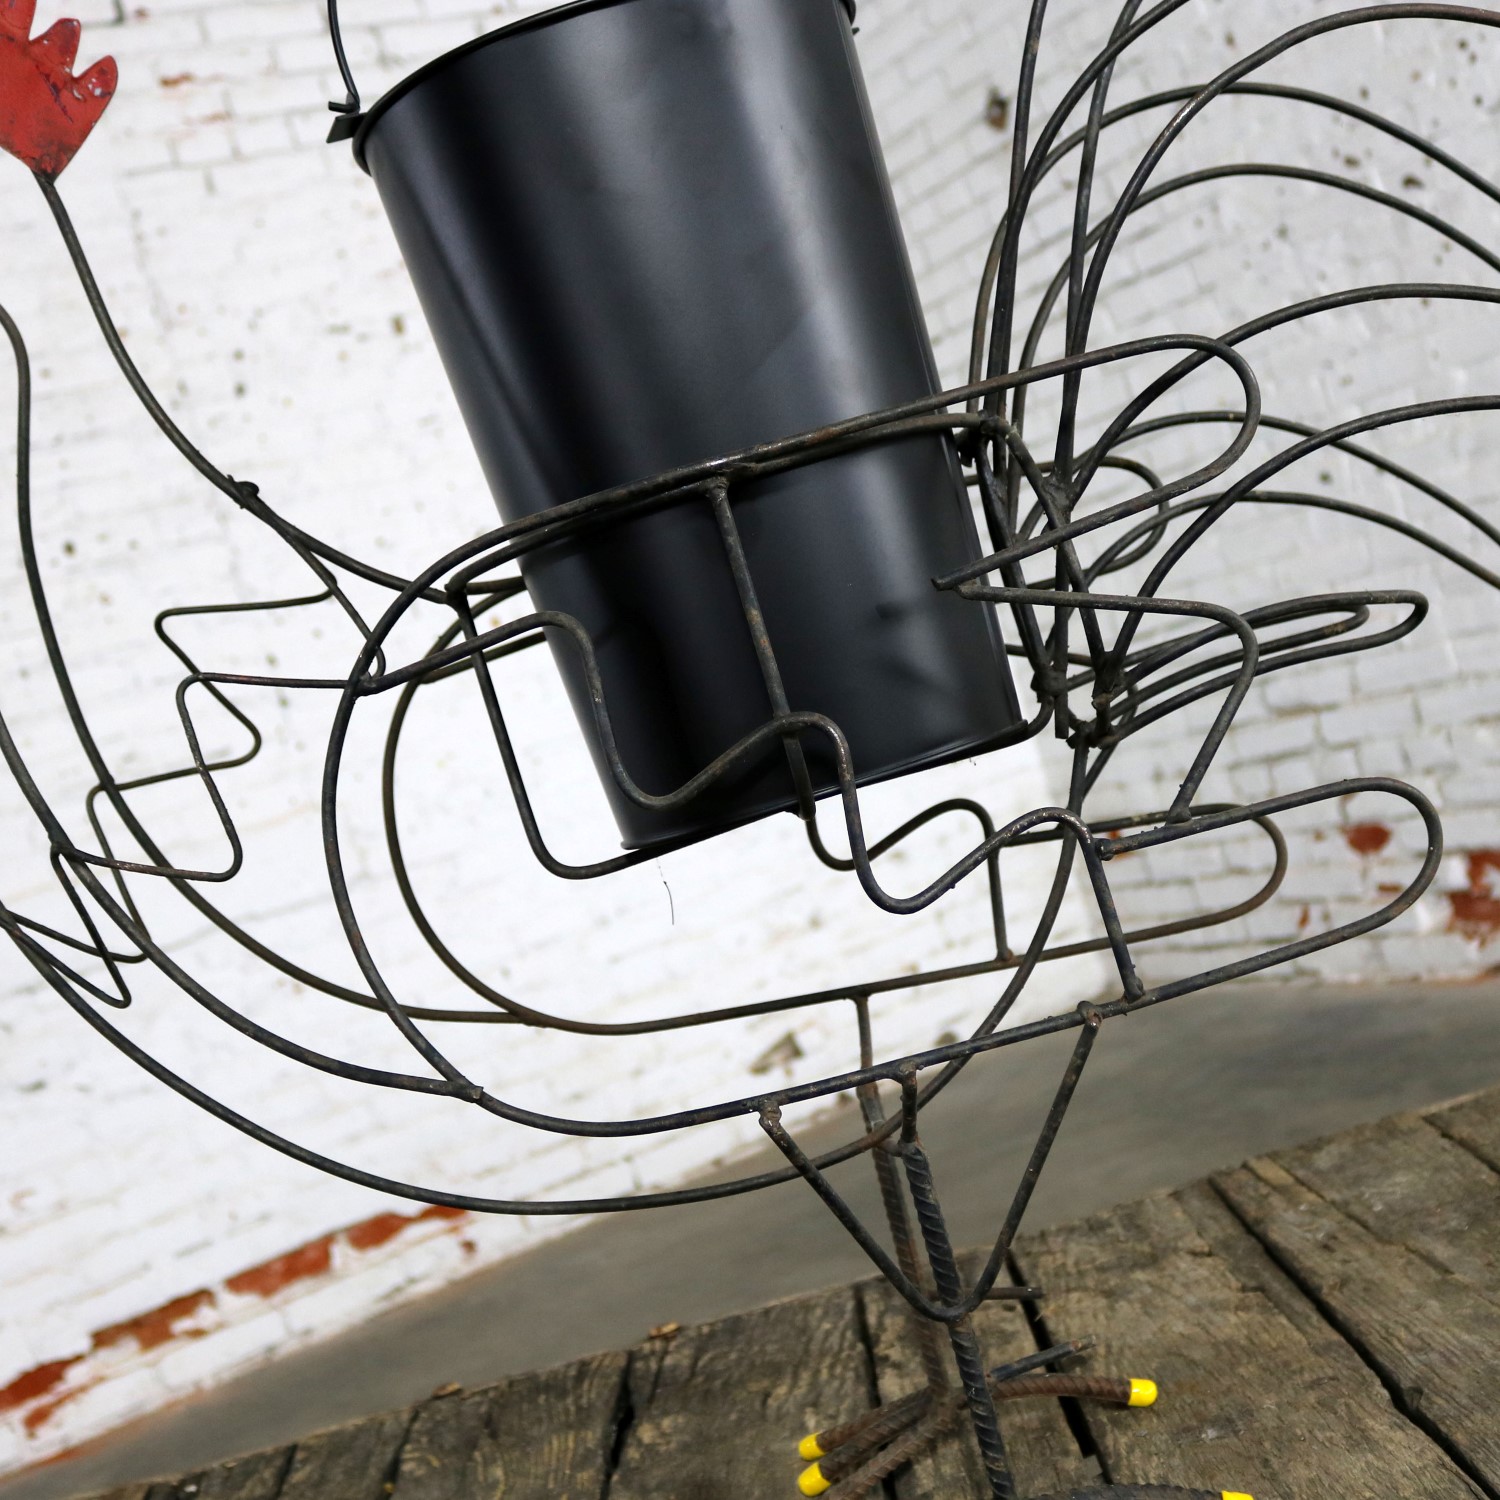 Wire Rooster Folk Art Planter with Red Comb Yellow Toes and Black Bucket